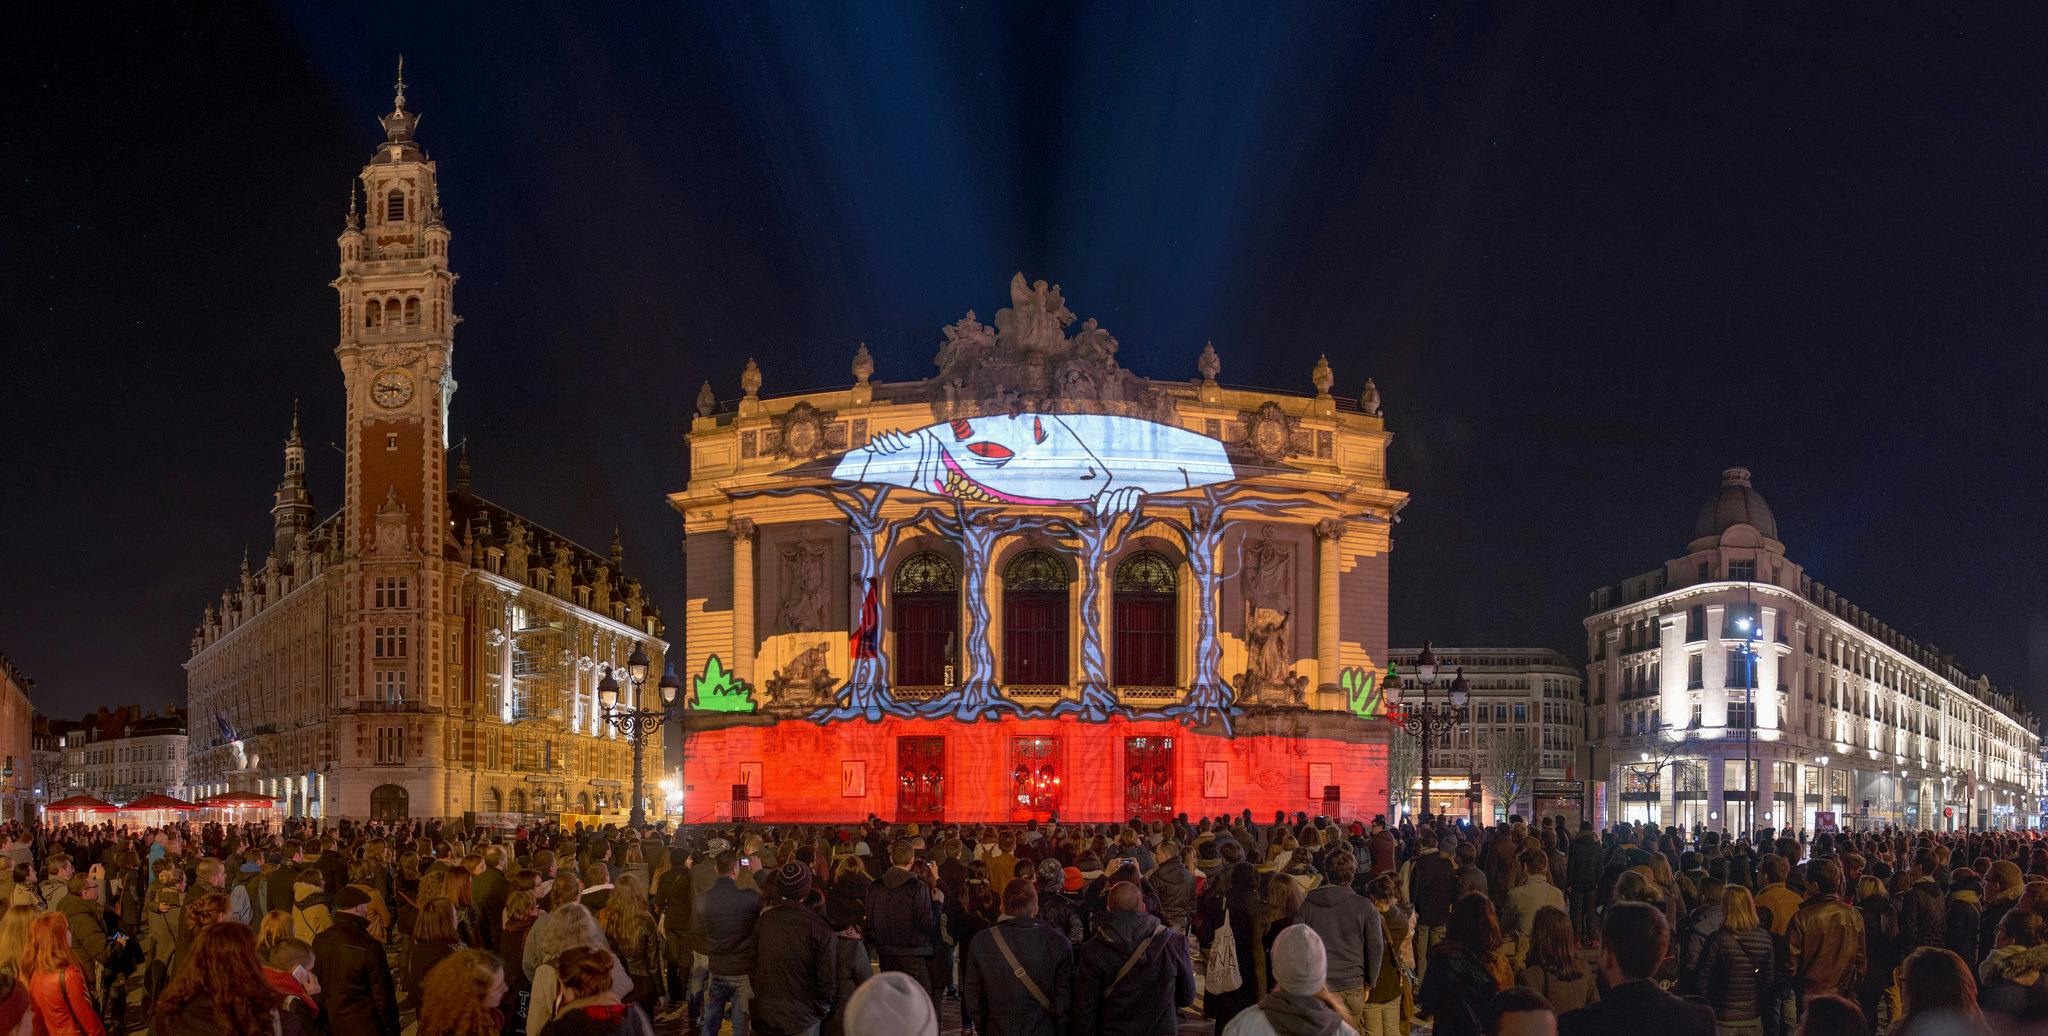 An evening in the city of Lille, France looking out onto a large crowd all watching a videomapped projection on an old building.